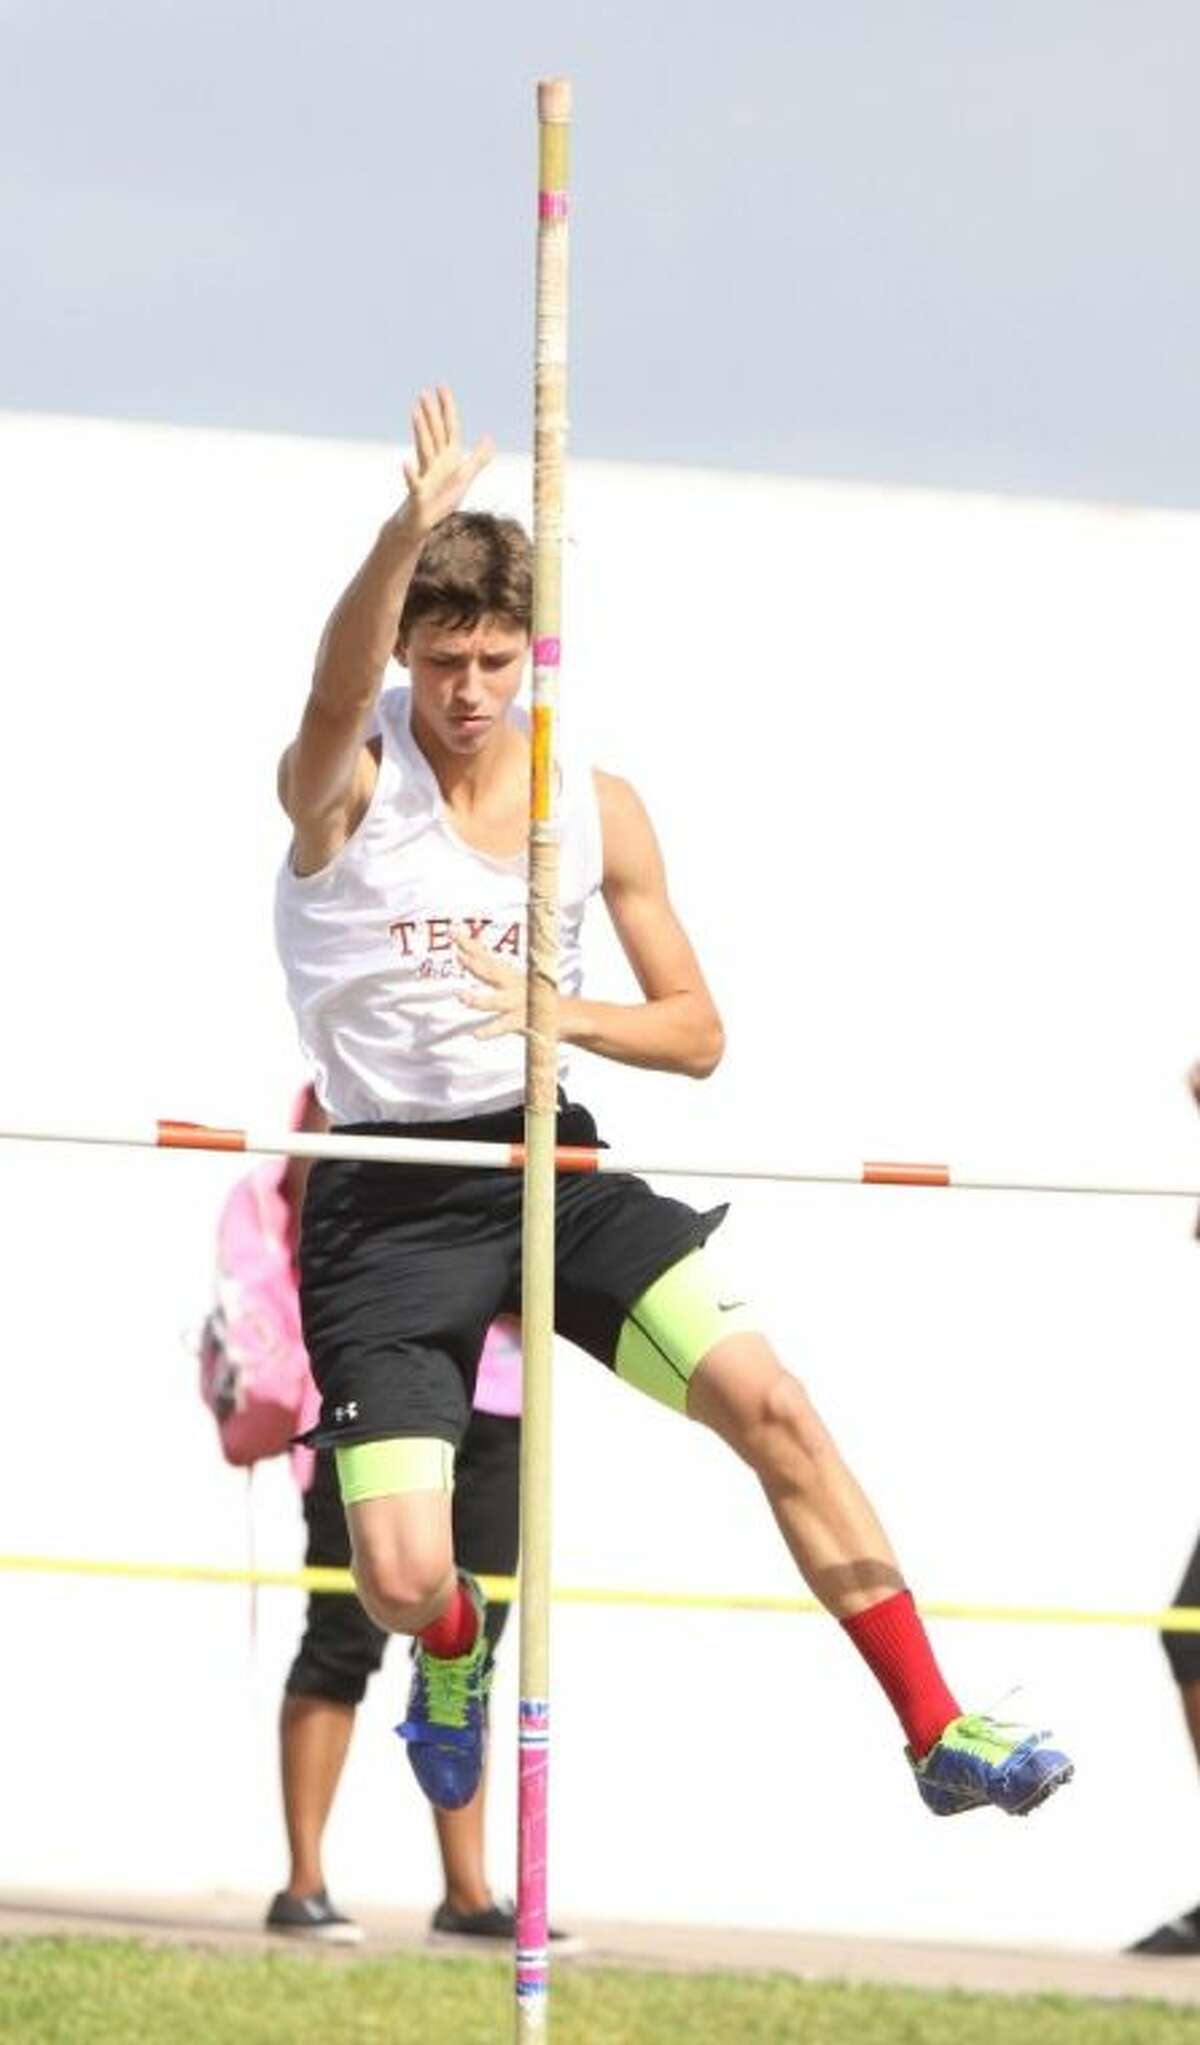 Area athletes competed for national championship berths at the Region 16 Junior Olympic Championships June 21 at Barnett Stadium. The final day included field events such as the pole vault.